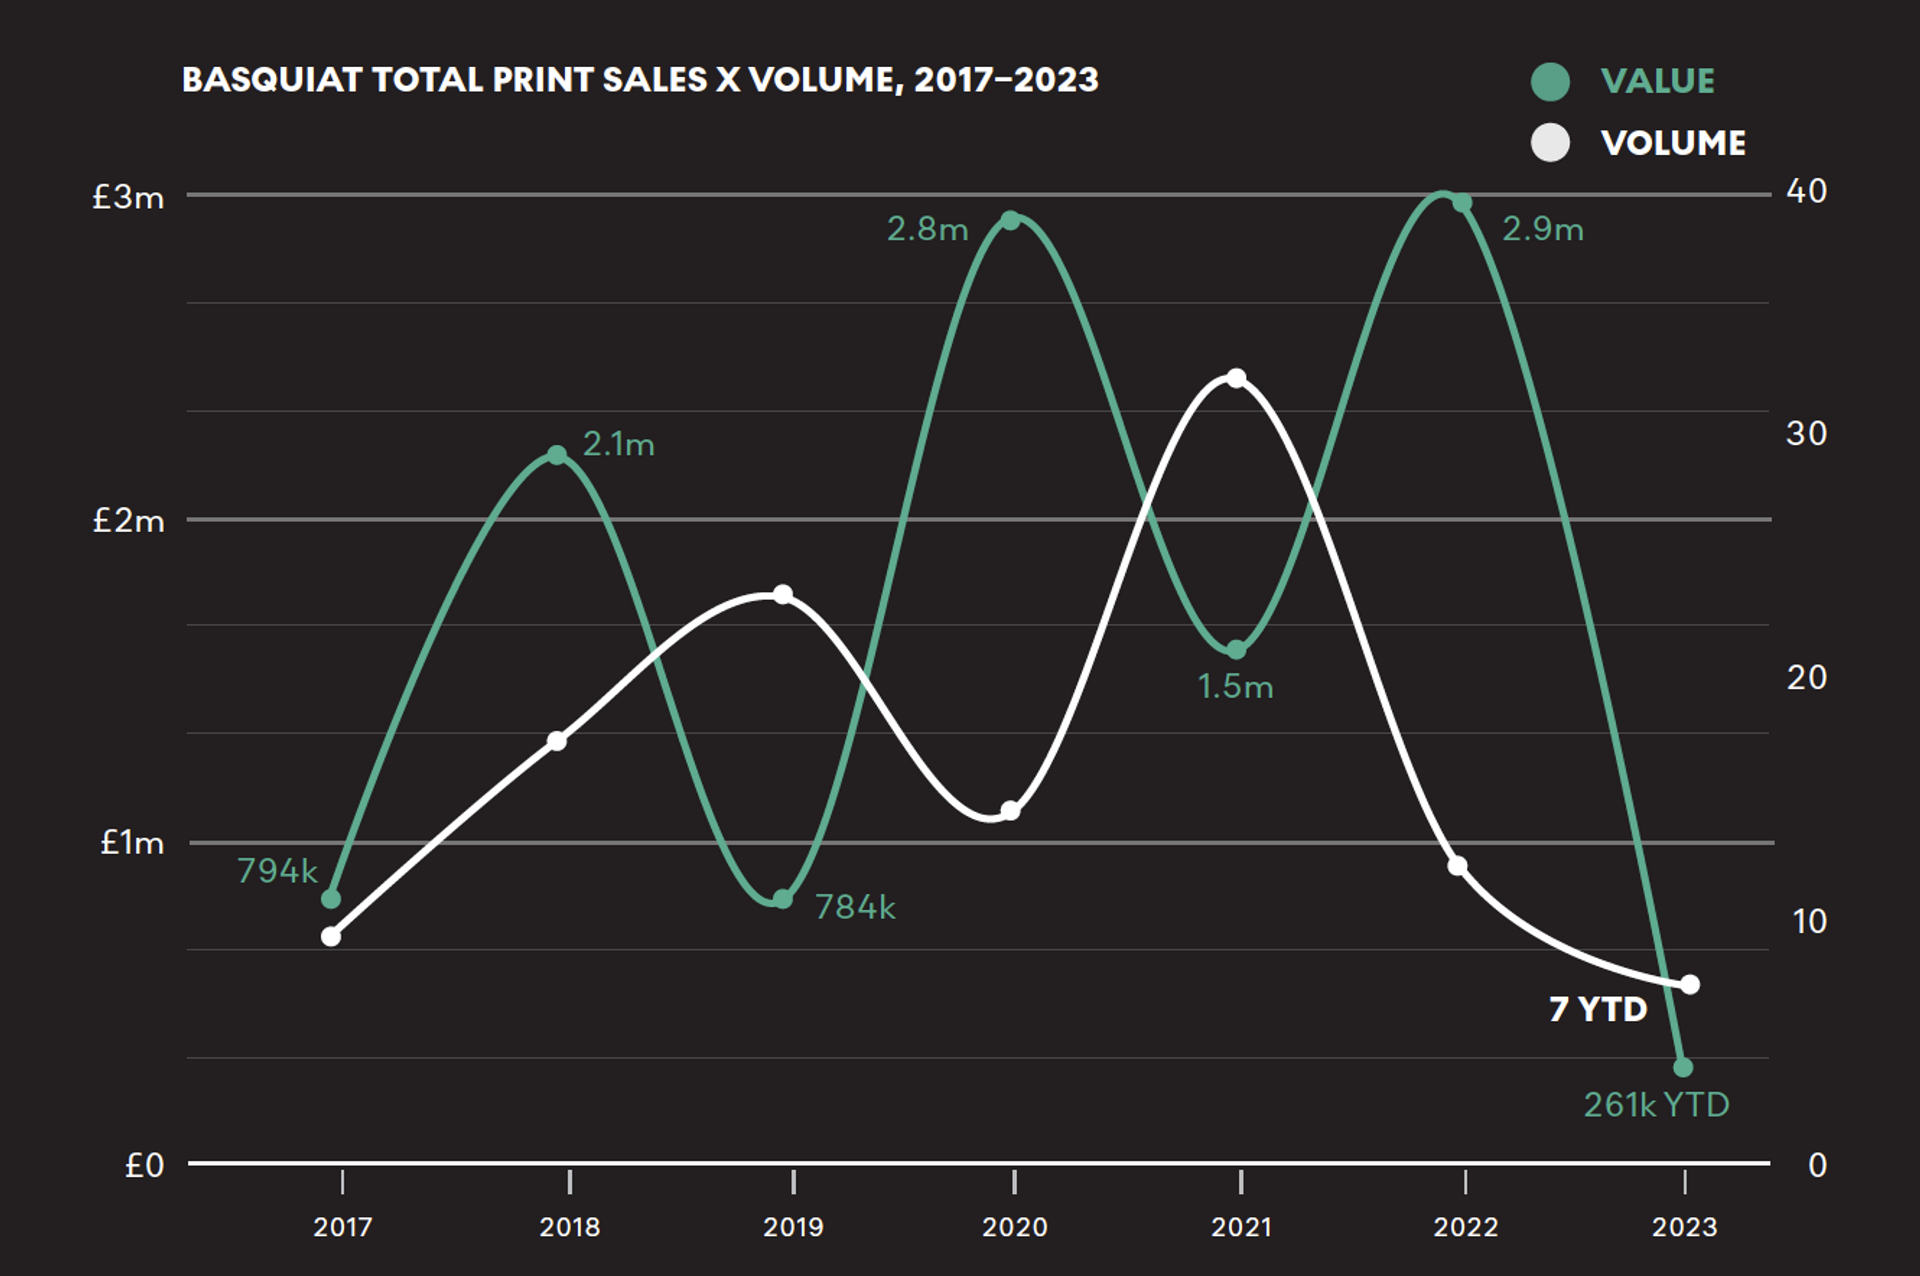  A double line graph illustrating Jean-Michel Basquiat's total year-on-year print performance and sales volume over a five-year period from 2017 to 2023.